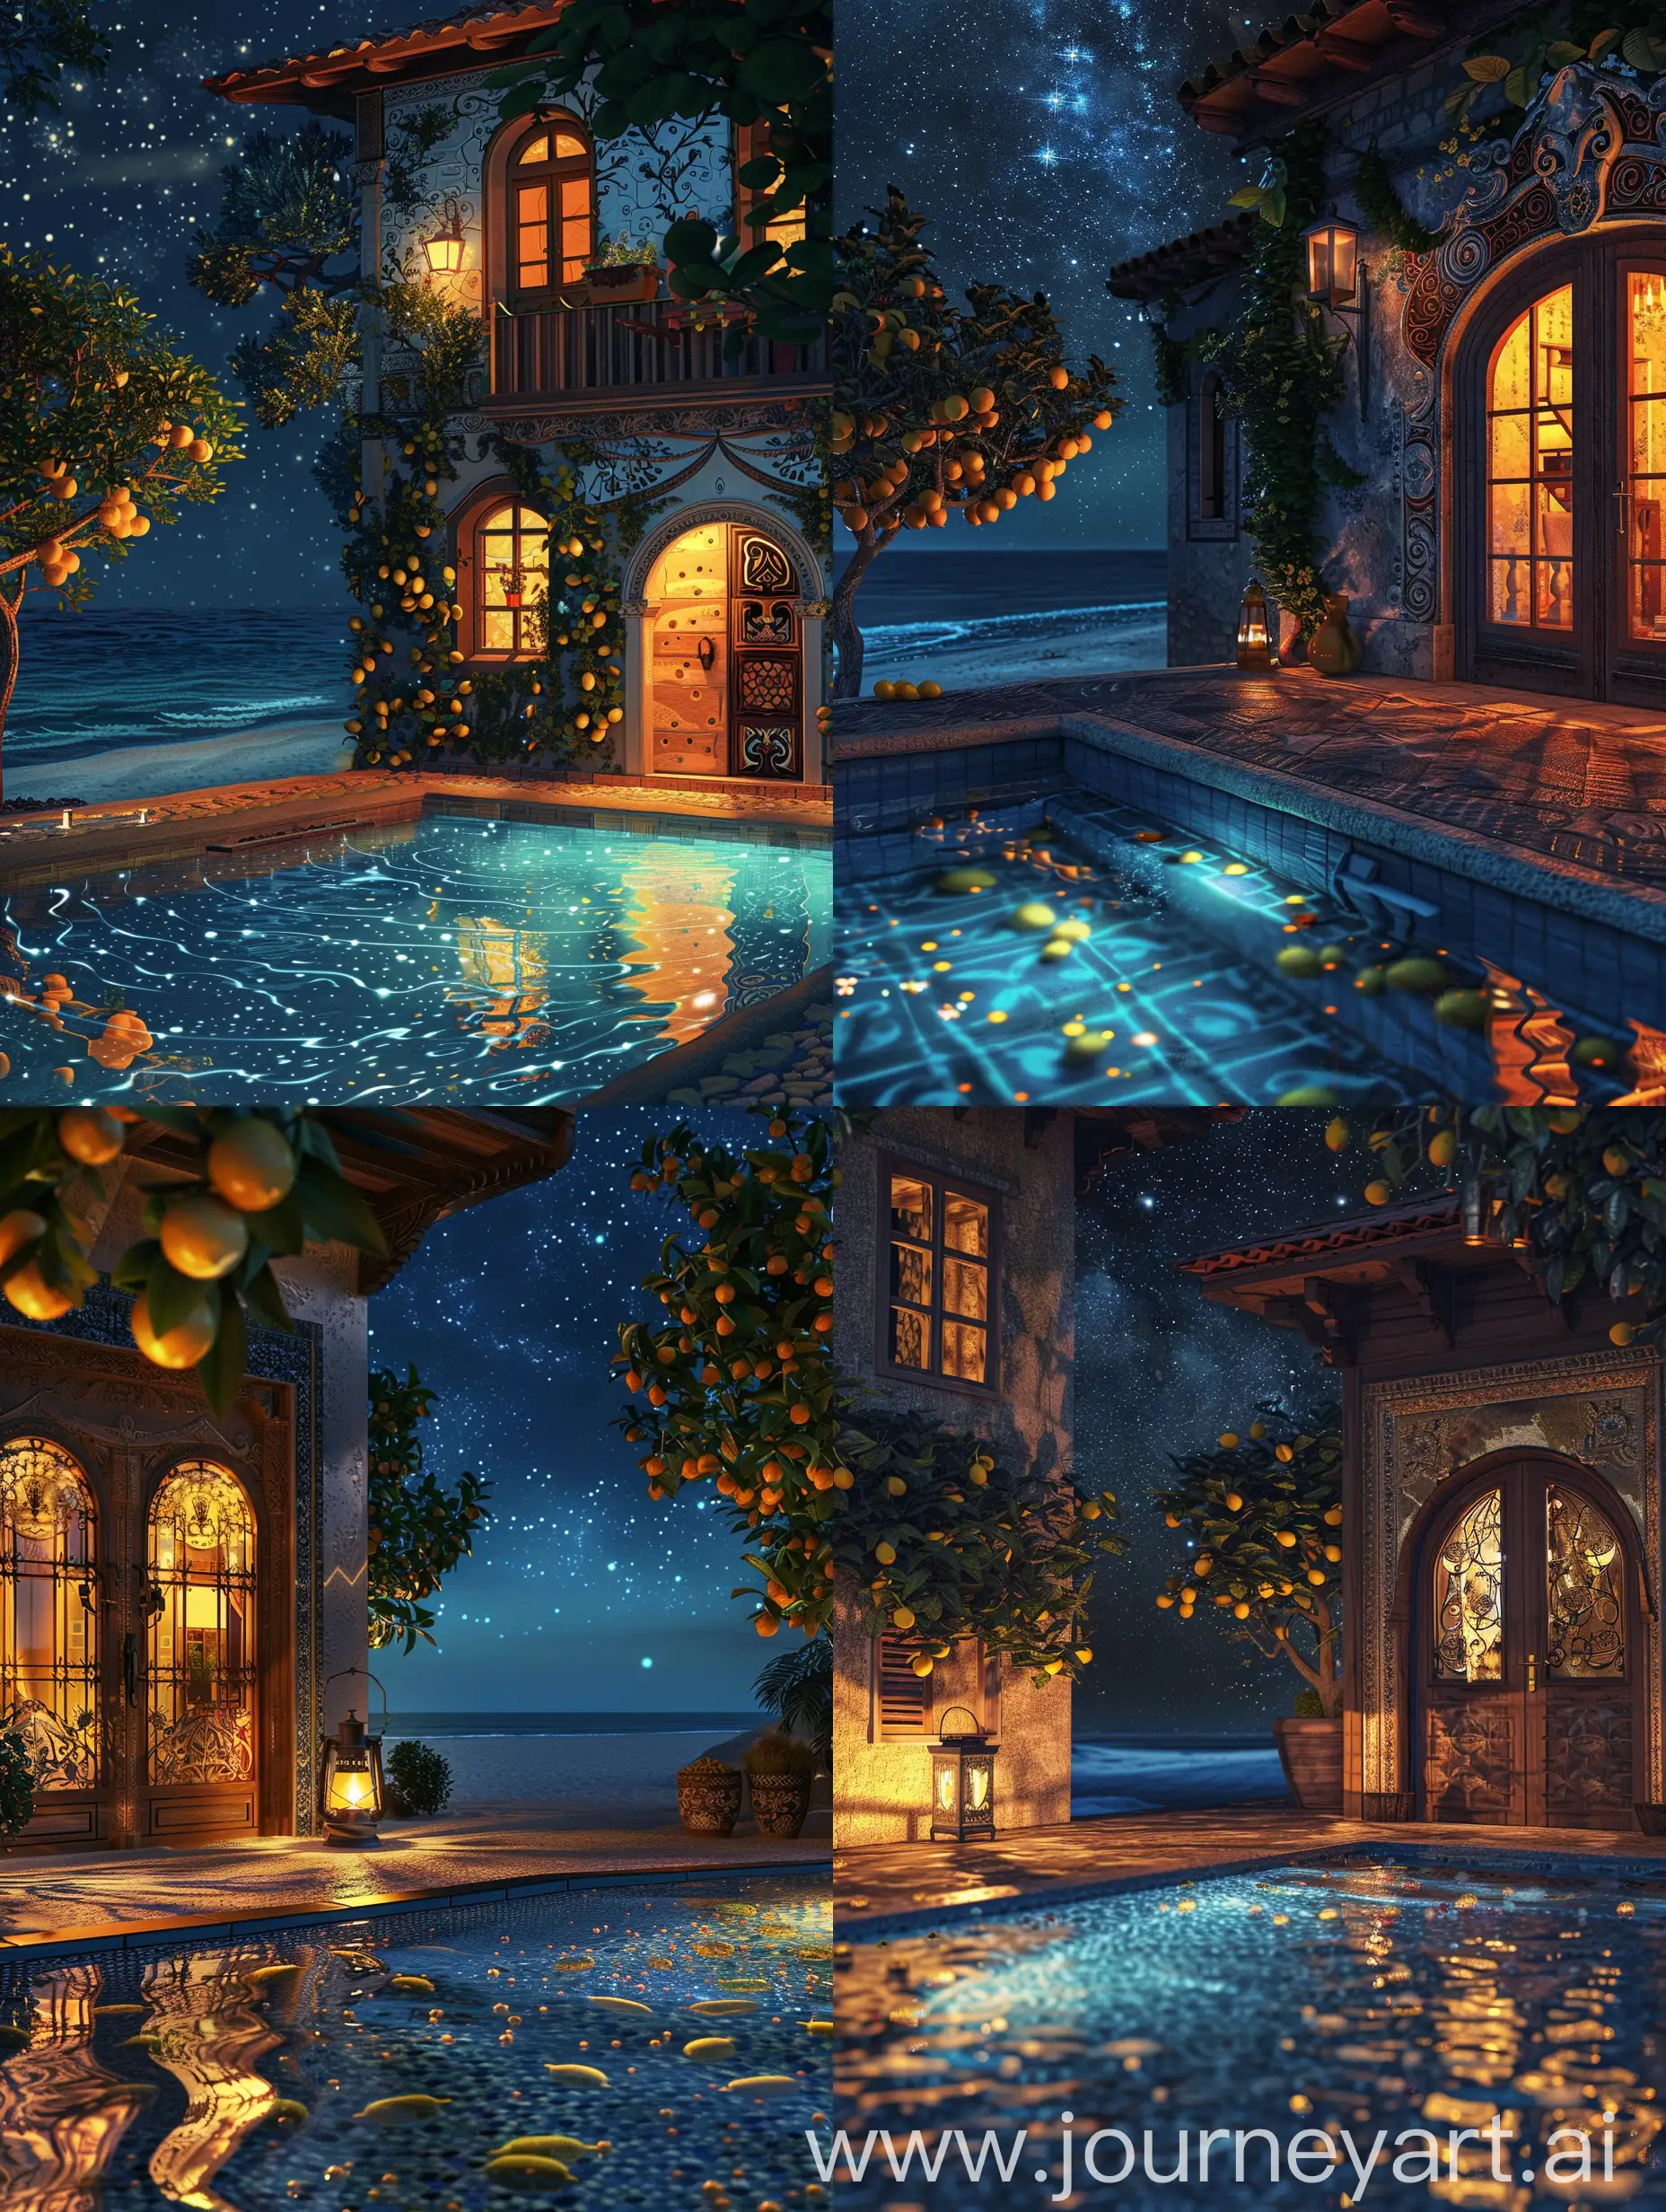 Starry-Night-House-with-Illuminated-Windows-and-Reflecting-Pool